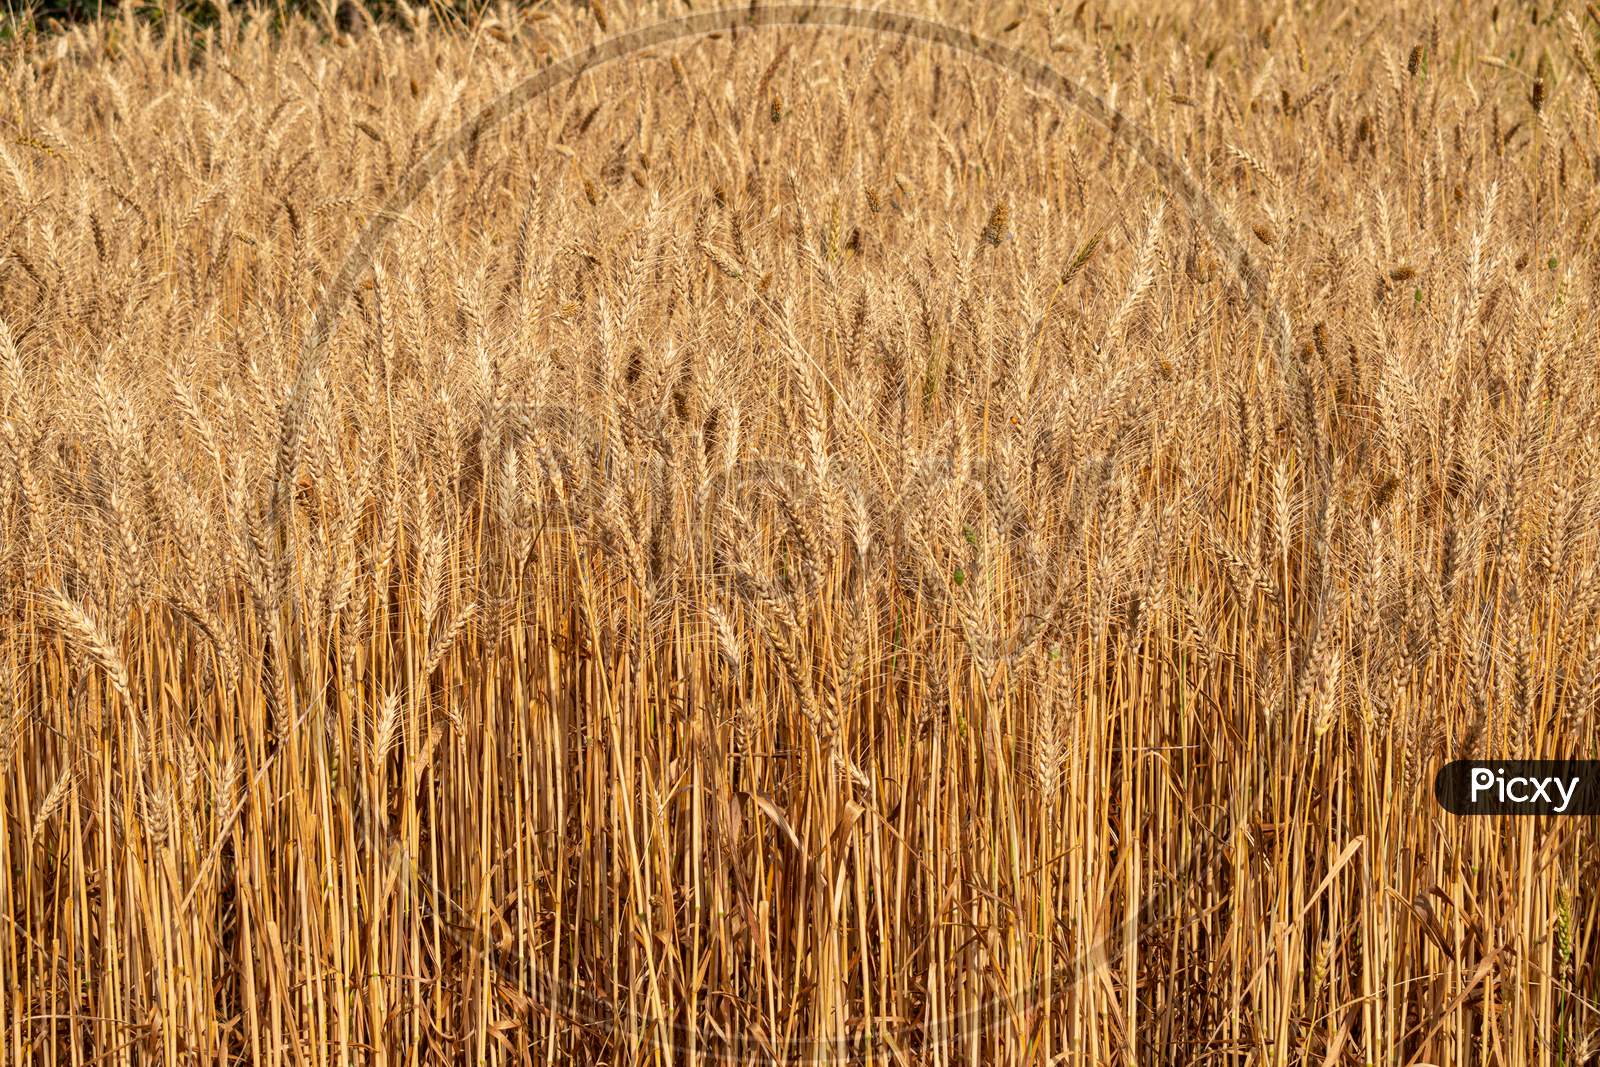 Ripe wheat crop ready for harvesting in an Indian rural village